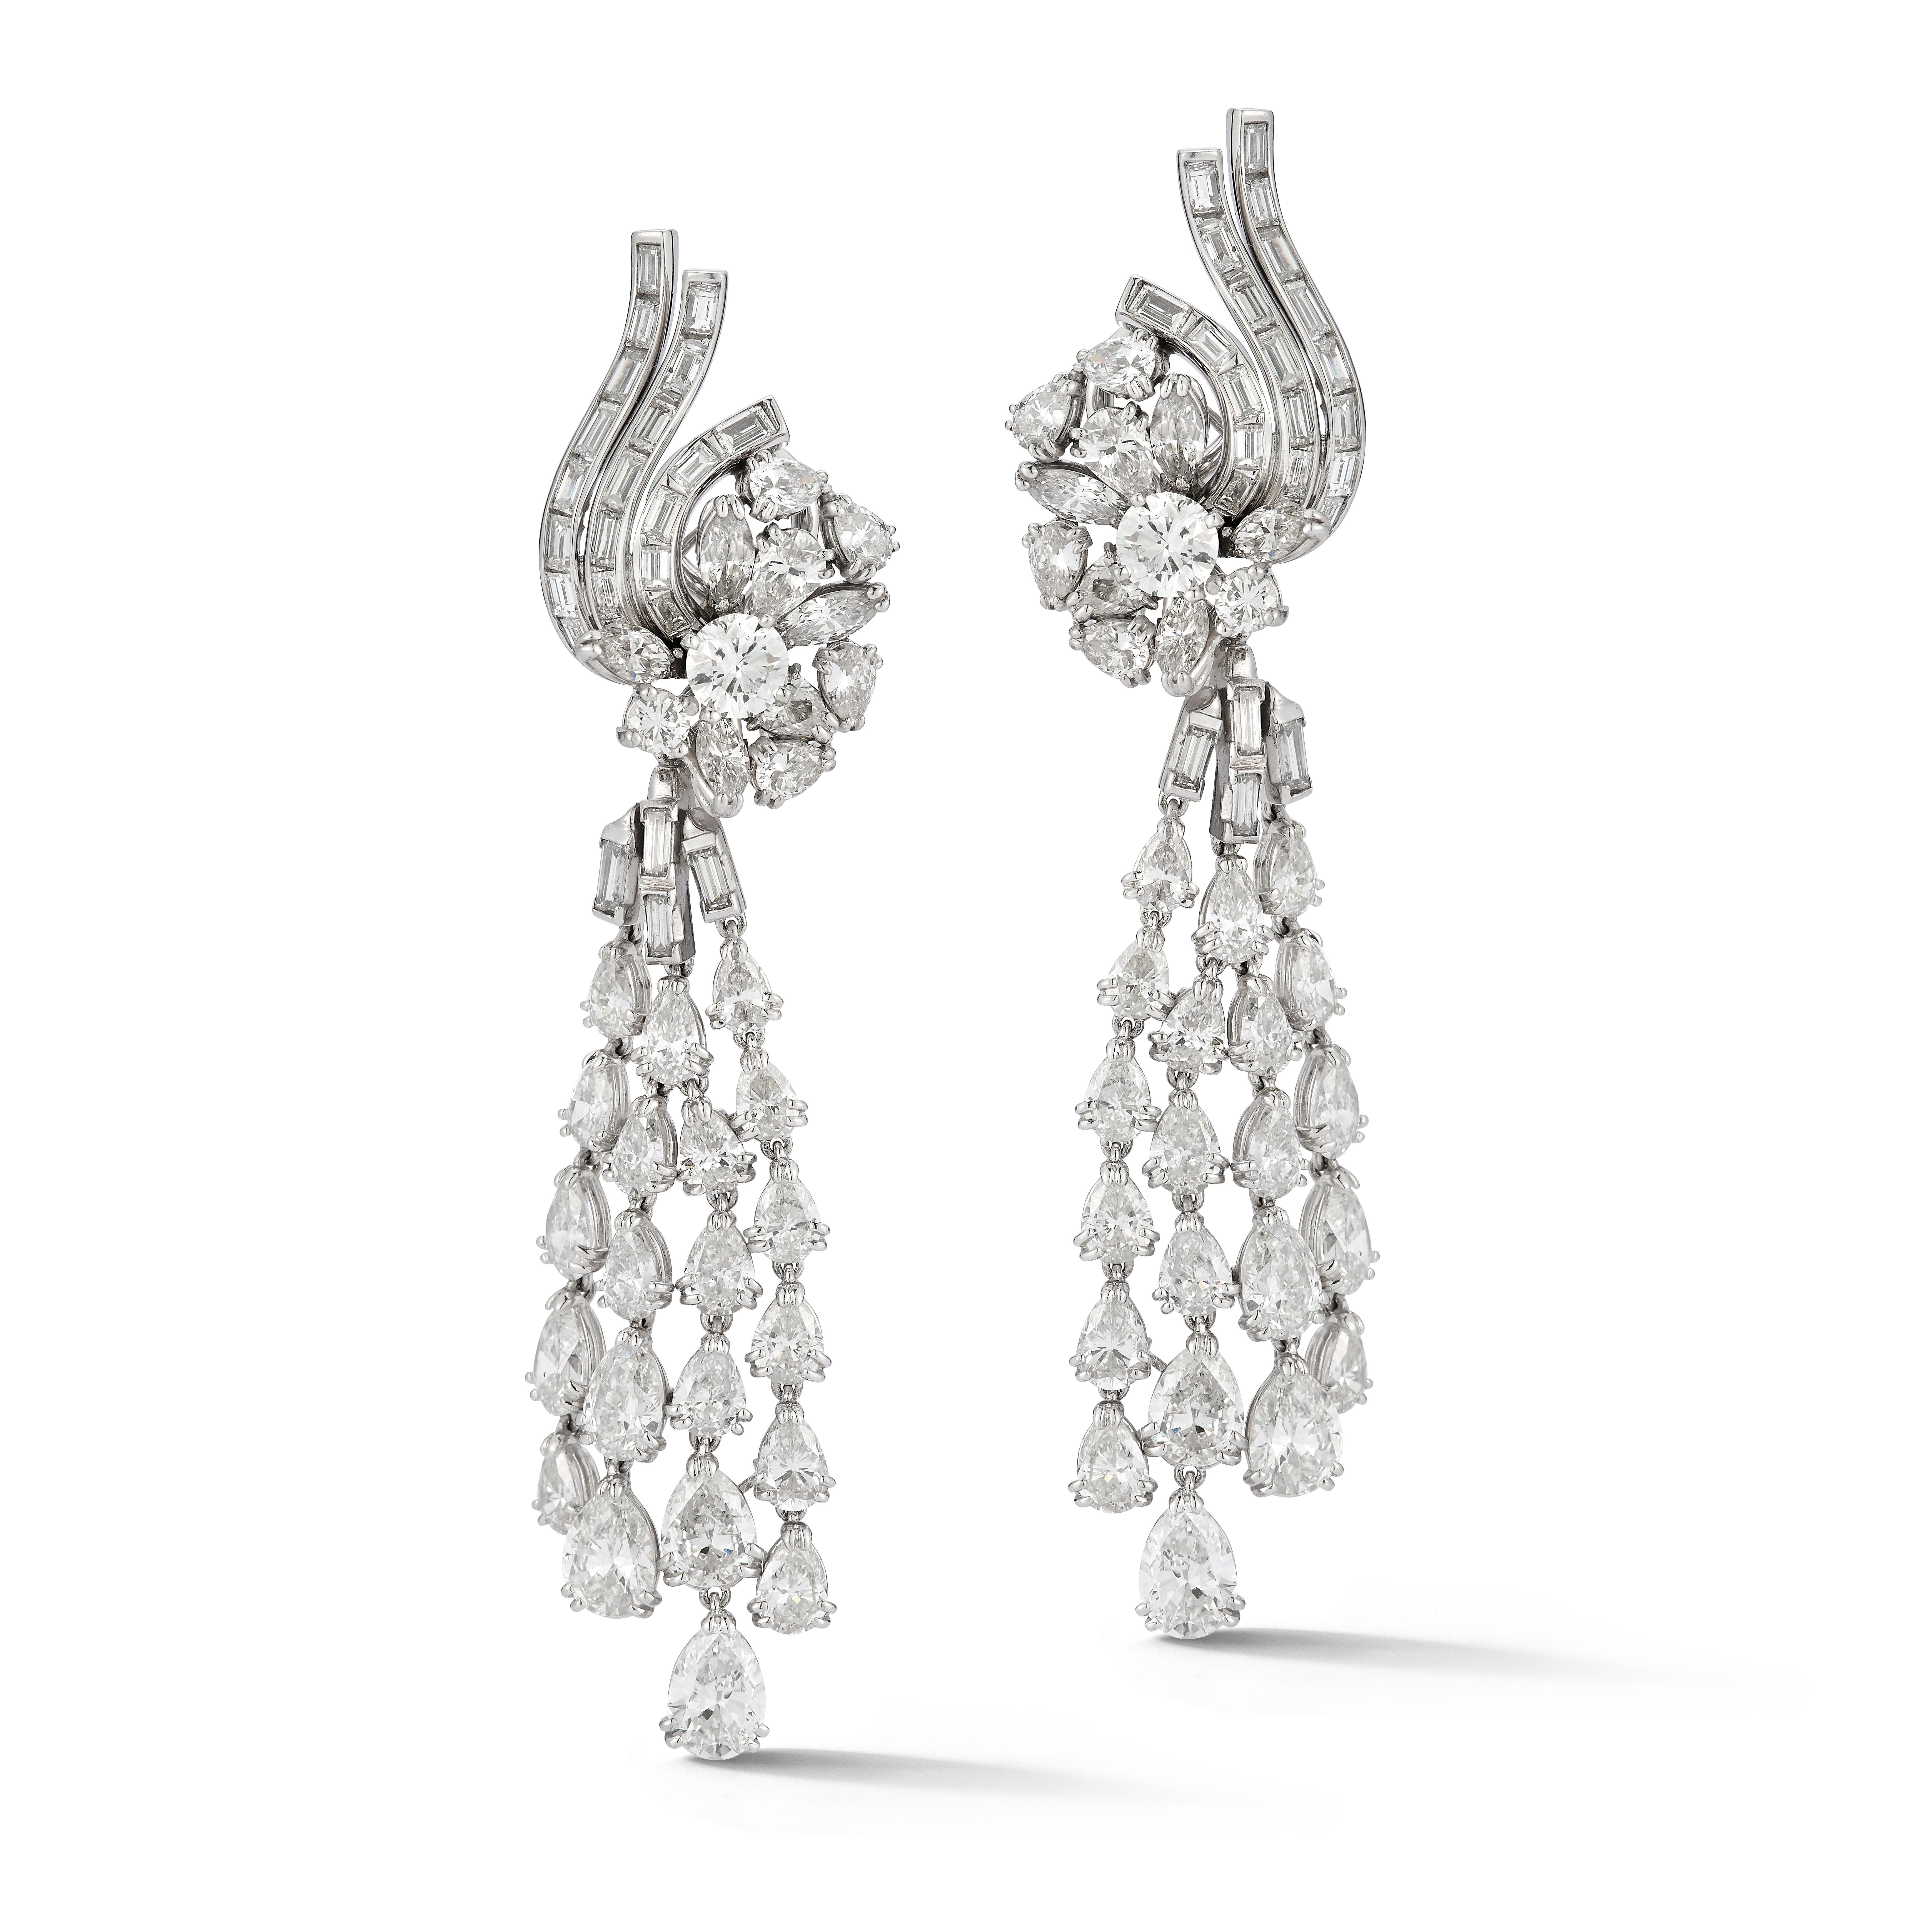 Diamond Cascade Day & Night Chandelier Earrings

A pair of platinum earrings set with 54 pear shaped diamonds, 48 baguette cut diamonds, 8 marquise cut diamonds, and 4 round cut diamonds. The cascading pear shaped diamonds are a removable attachment